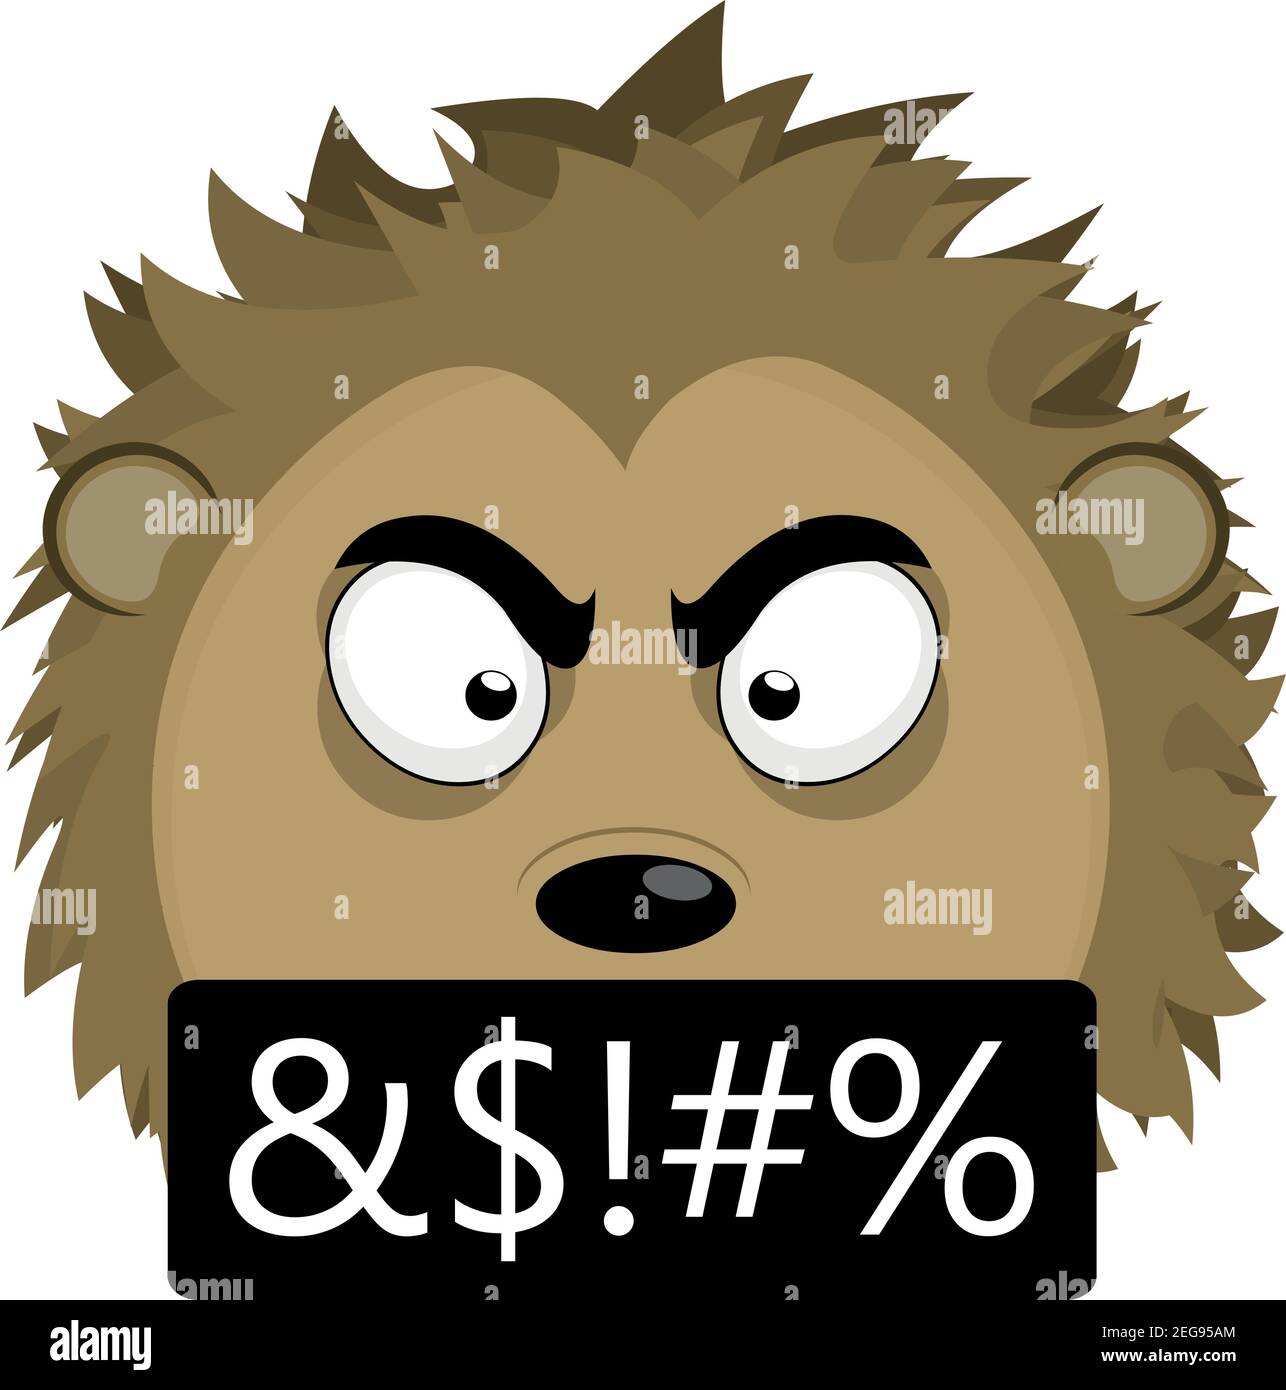 Vector Emoticon Illustration Cartoon Of A Porcupines Head With An Angry Expression And Cursing 